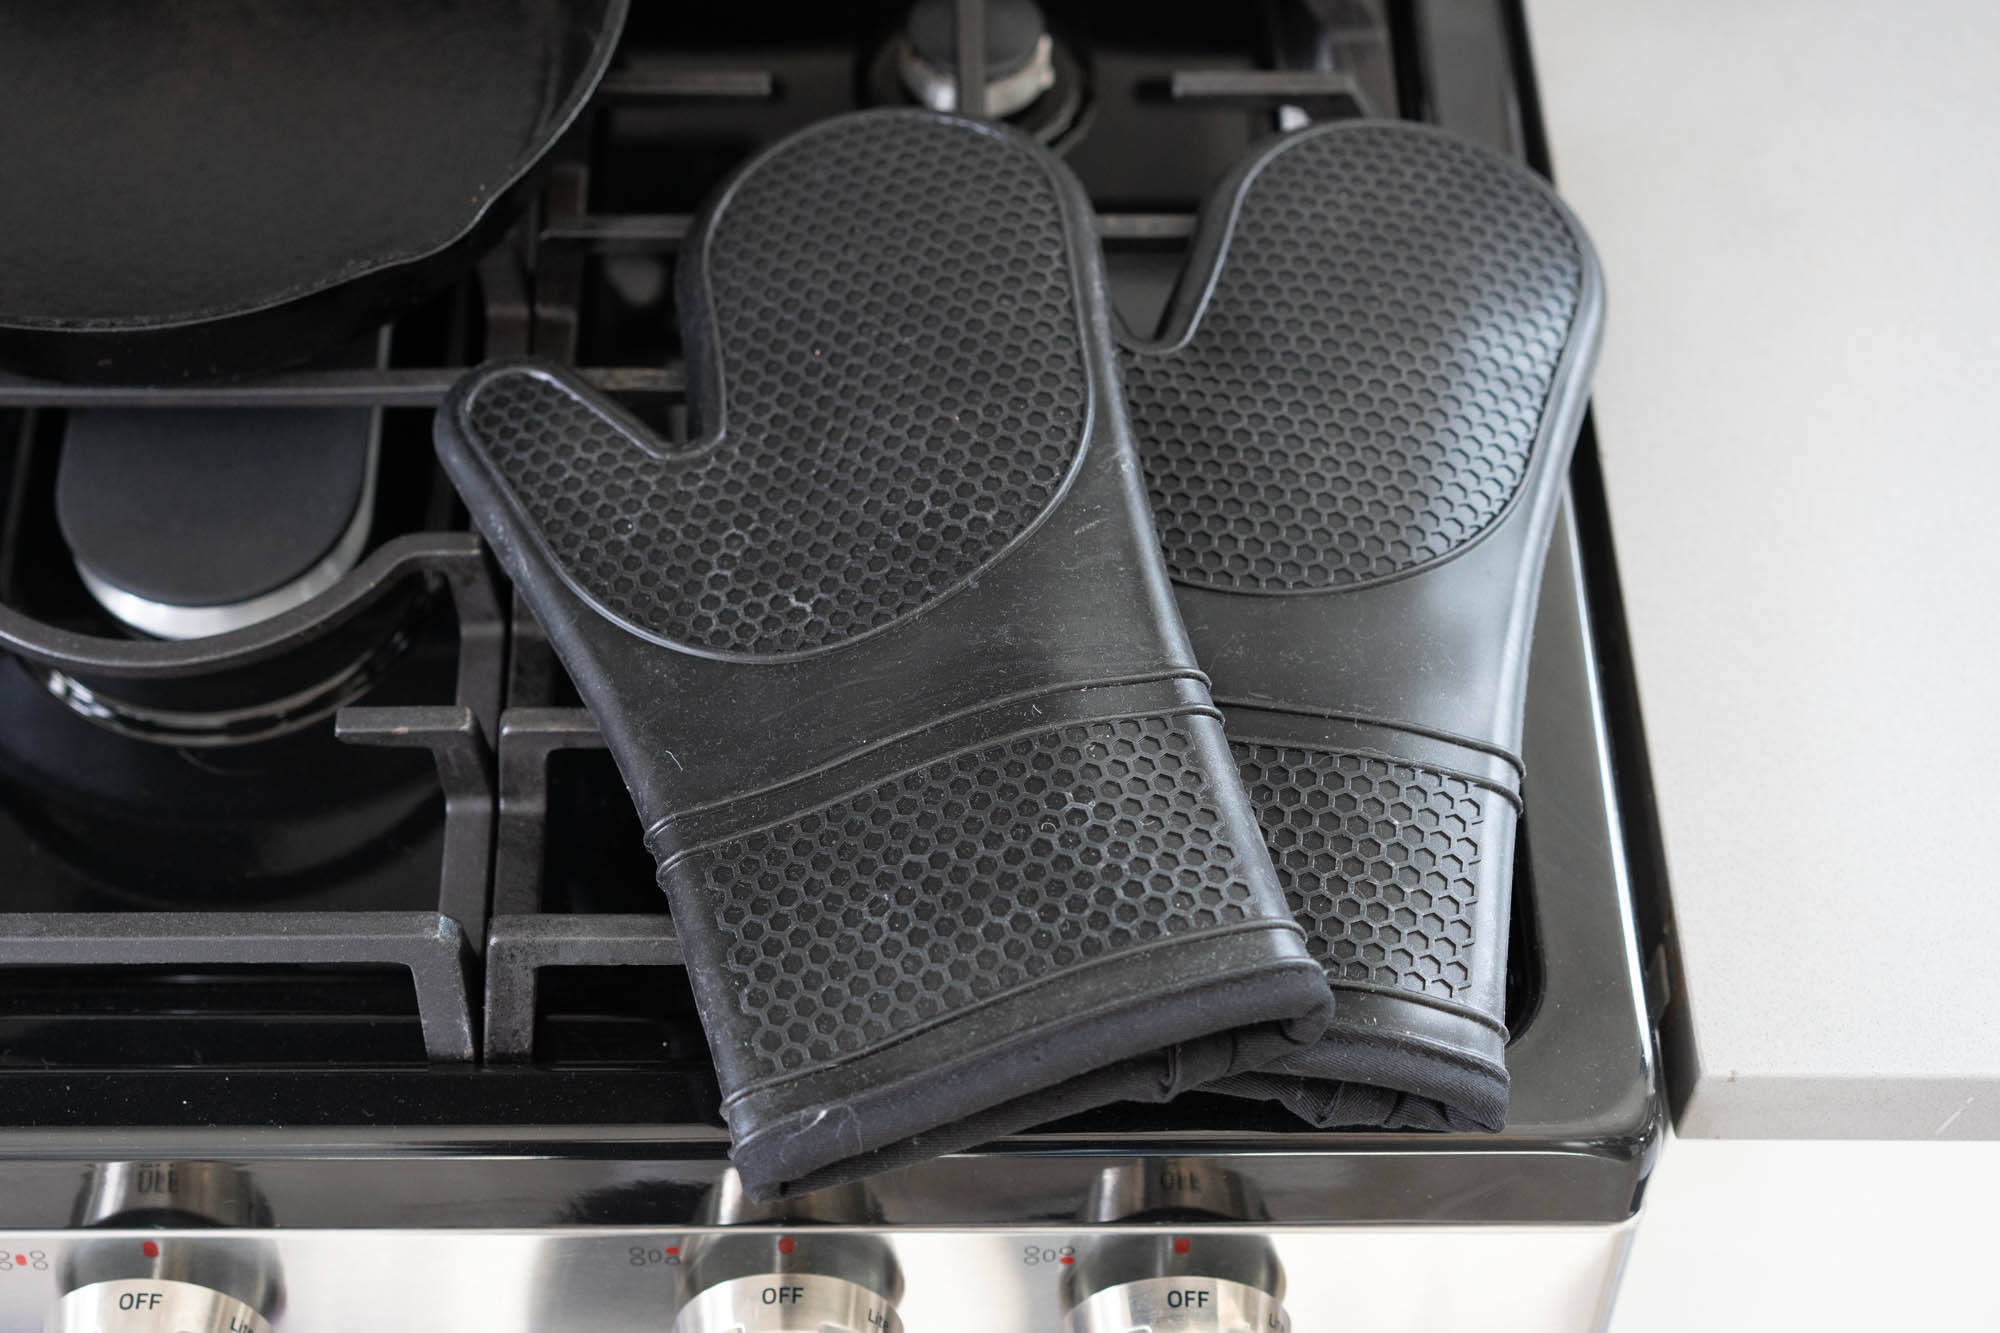 5 Best Oven Mitts of 2023